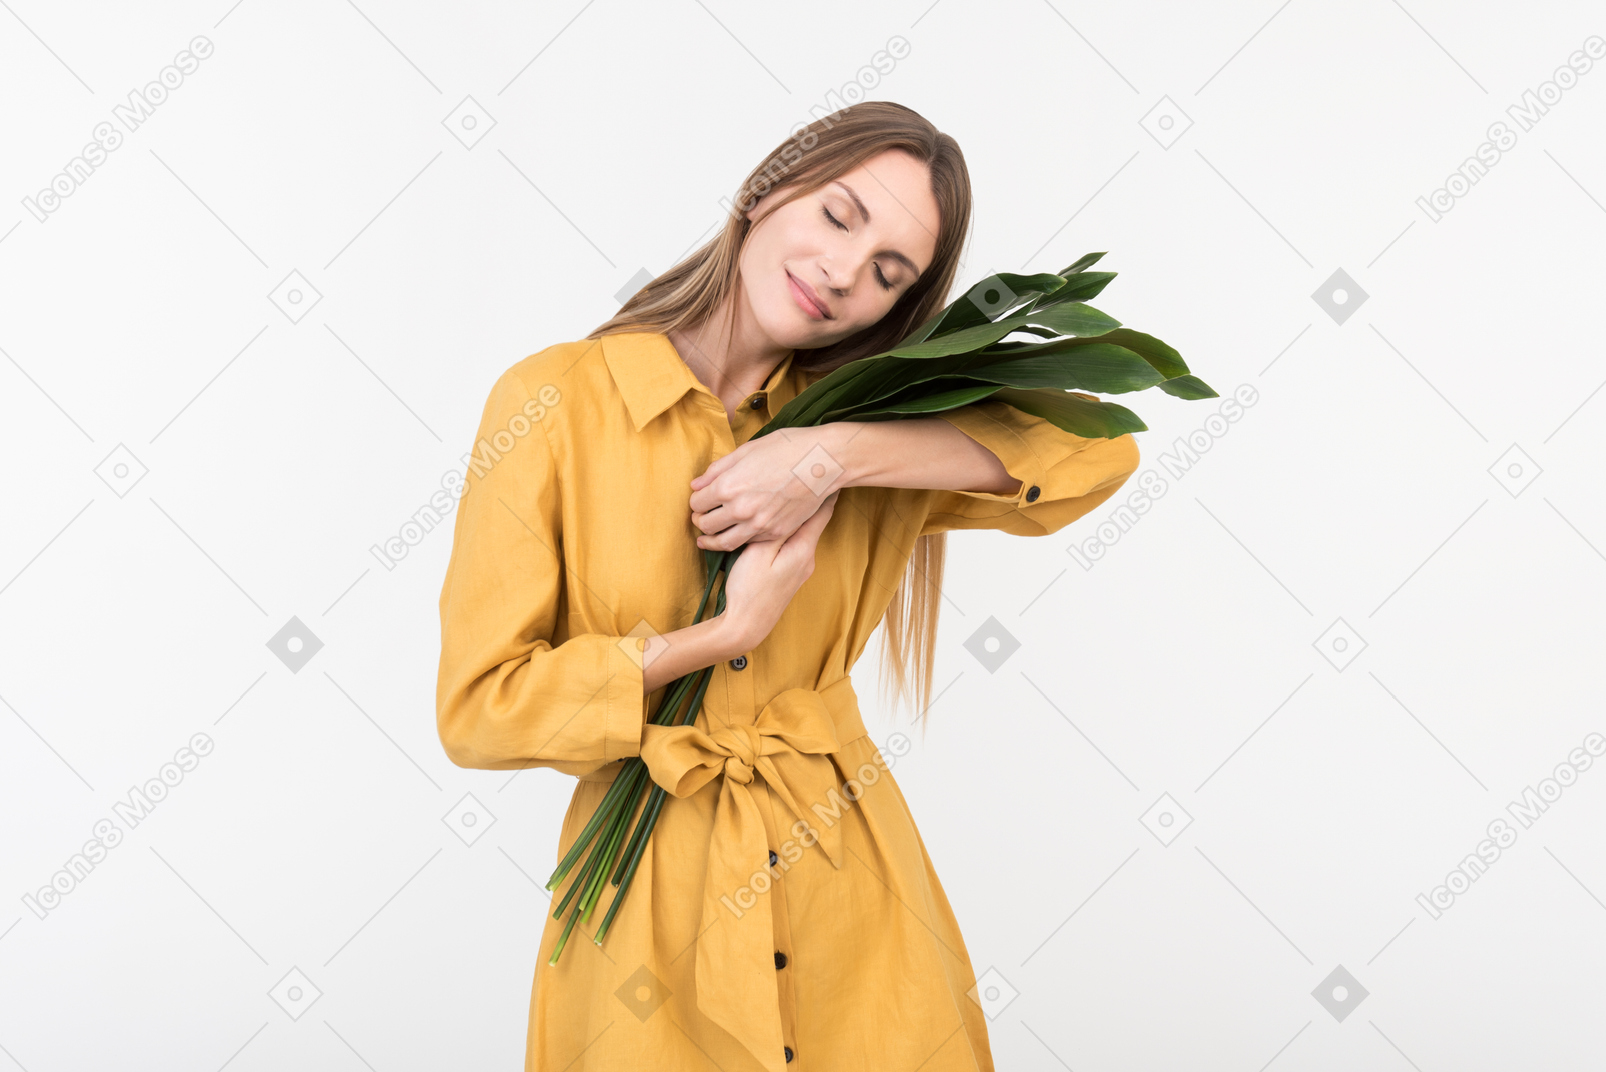 Young woman holding branch tenderly like a child